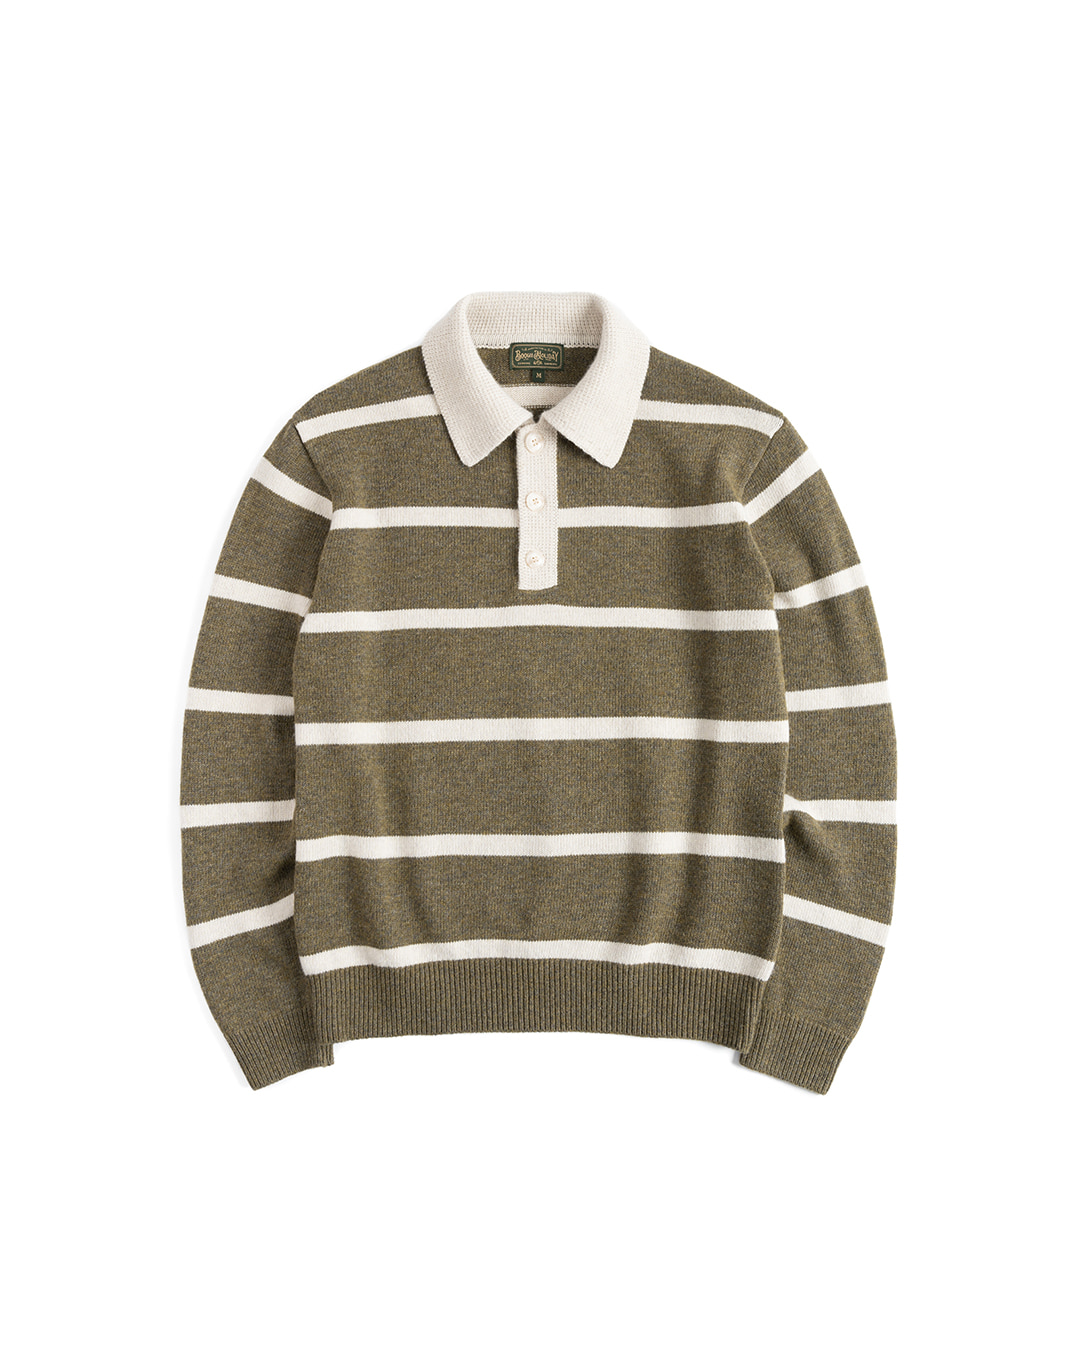 10 KNITTED RUGBY SHIRT (olive)